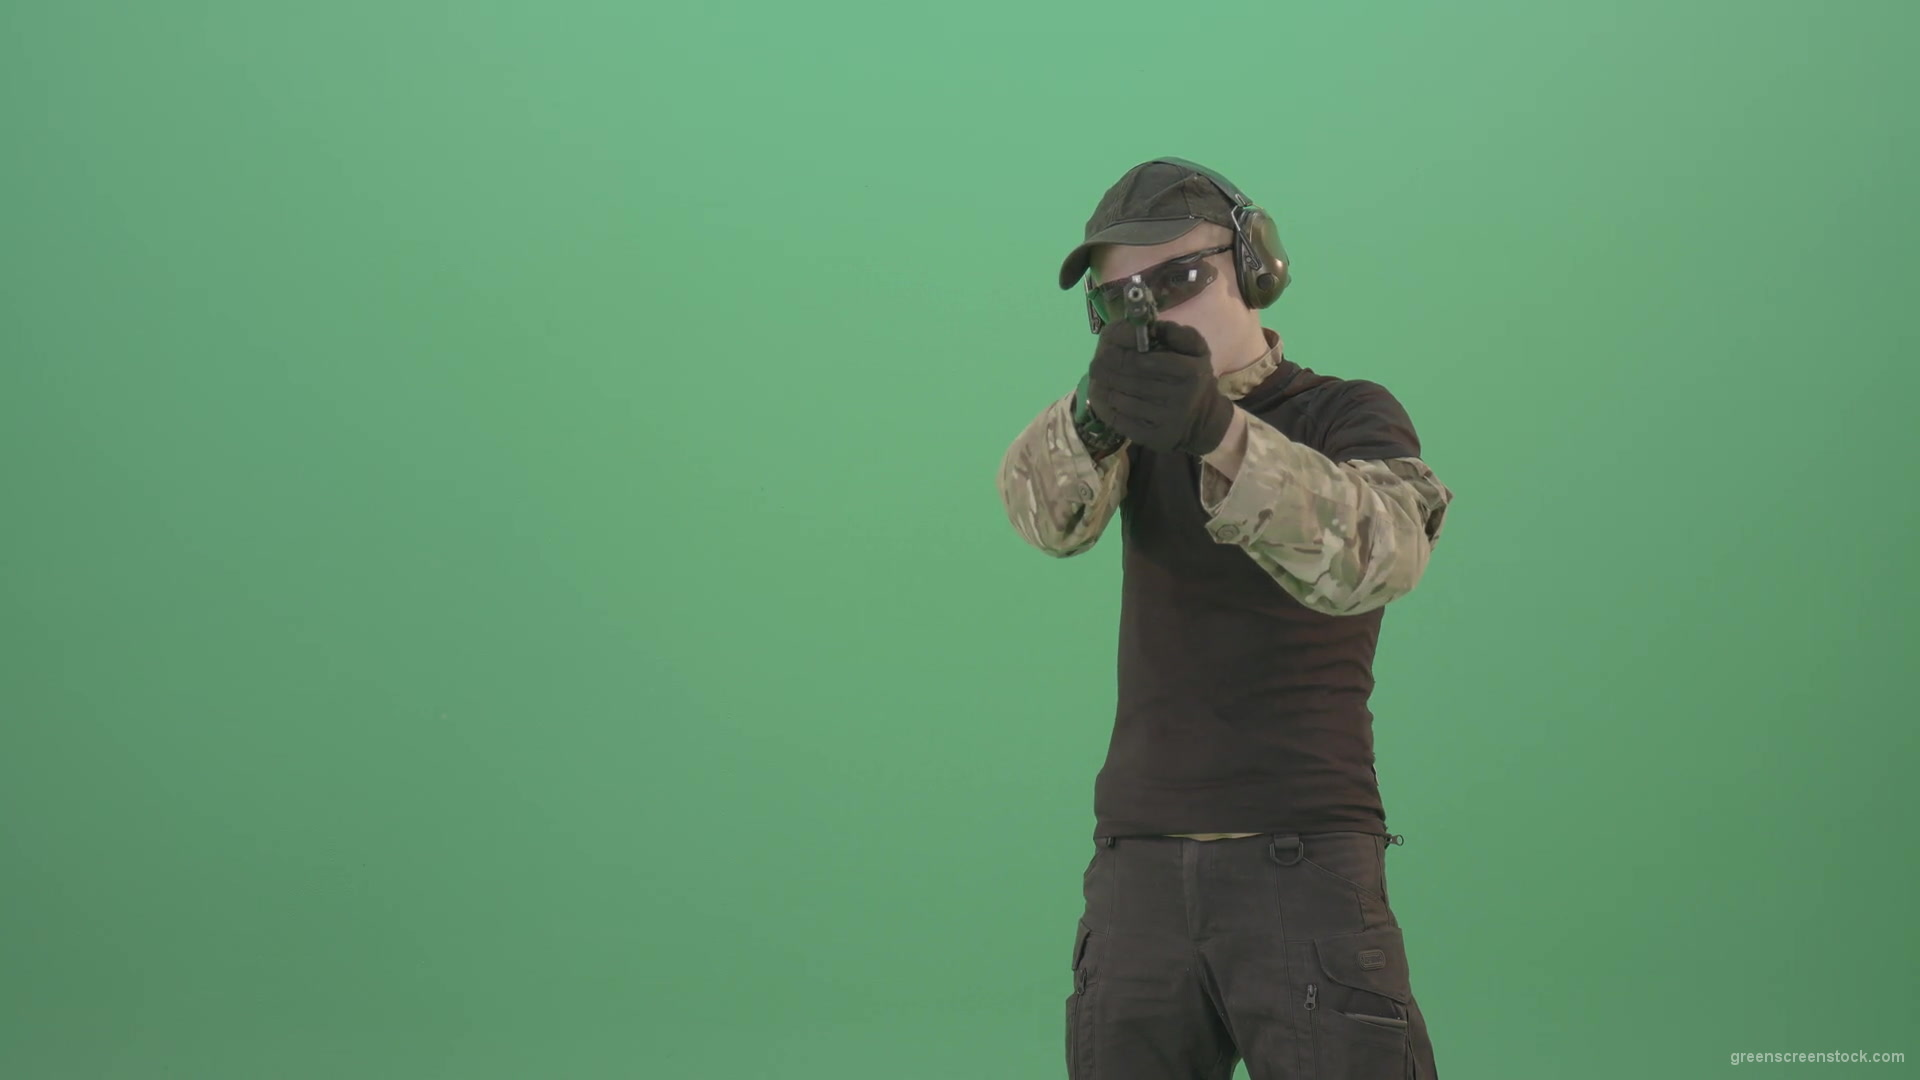 Young-boy-sodier-testin-small-pistol-gun-and-shooting-isolated-on-green-screen-4K-Video-Footage-1920_006 Green Screen Stock